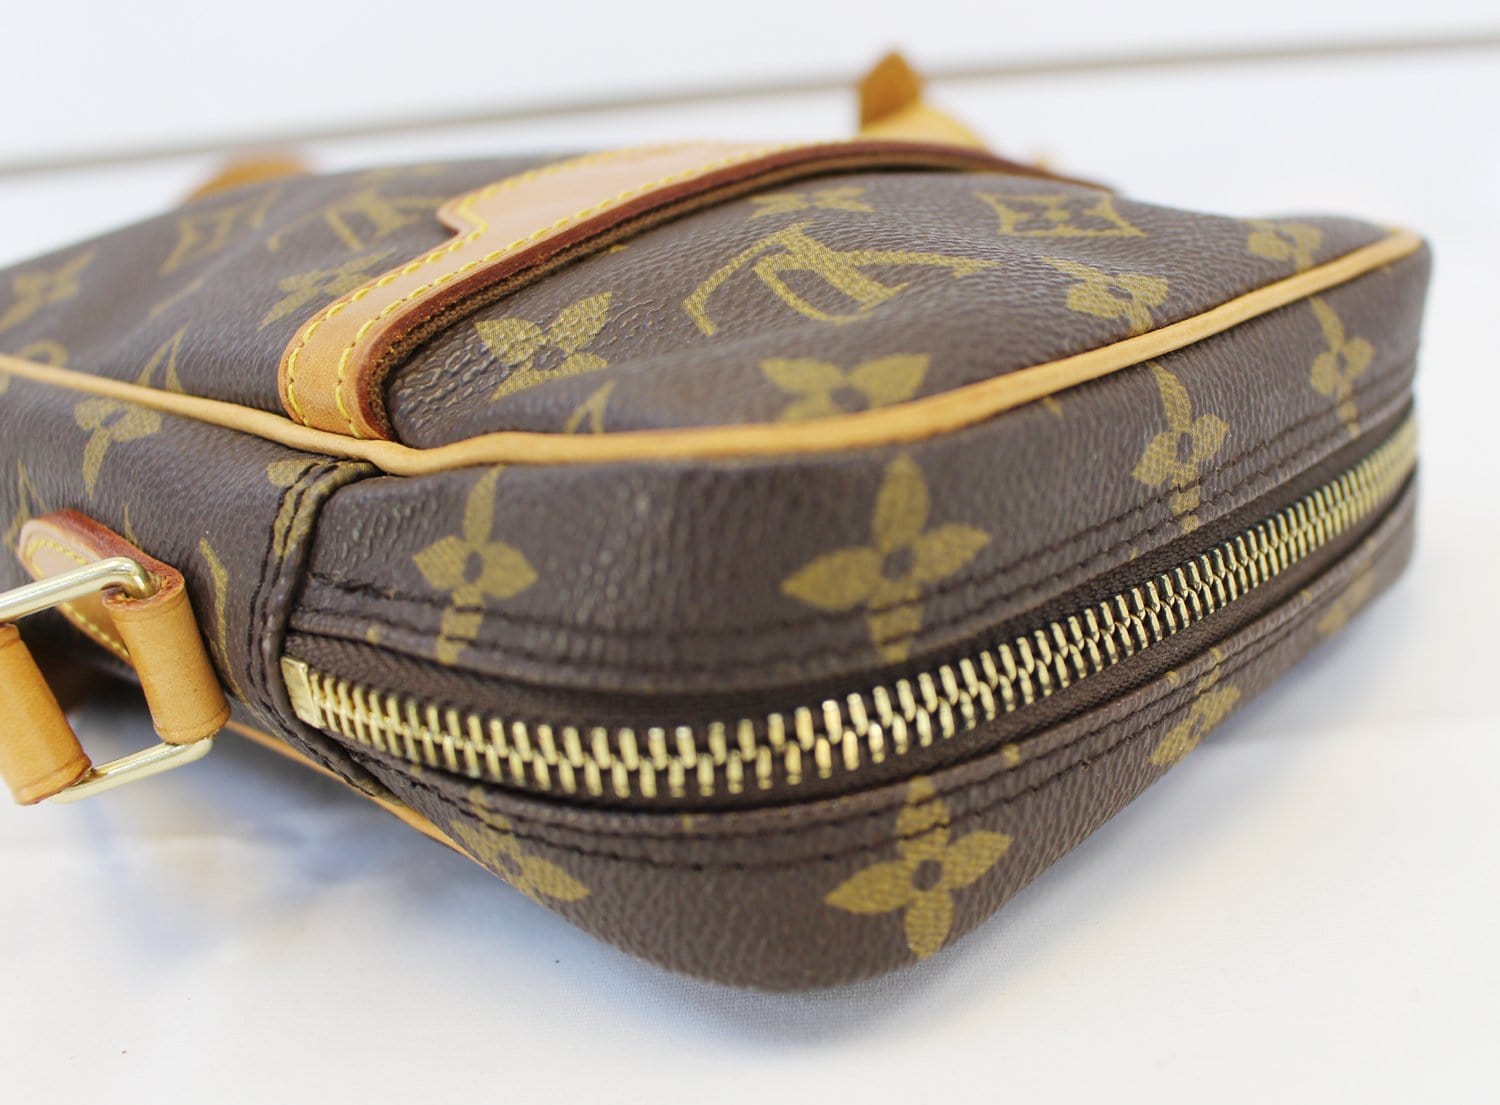 History of the bag: Louis Vuitton Danube